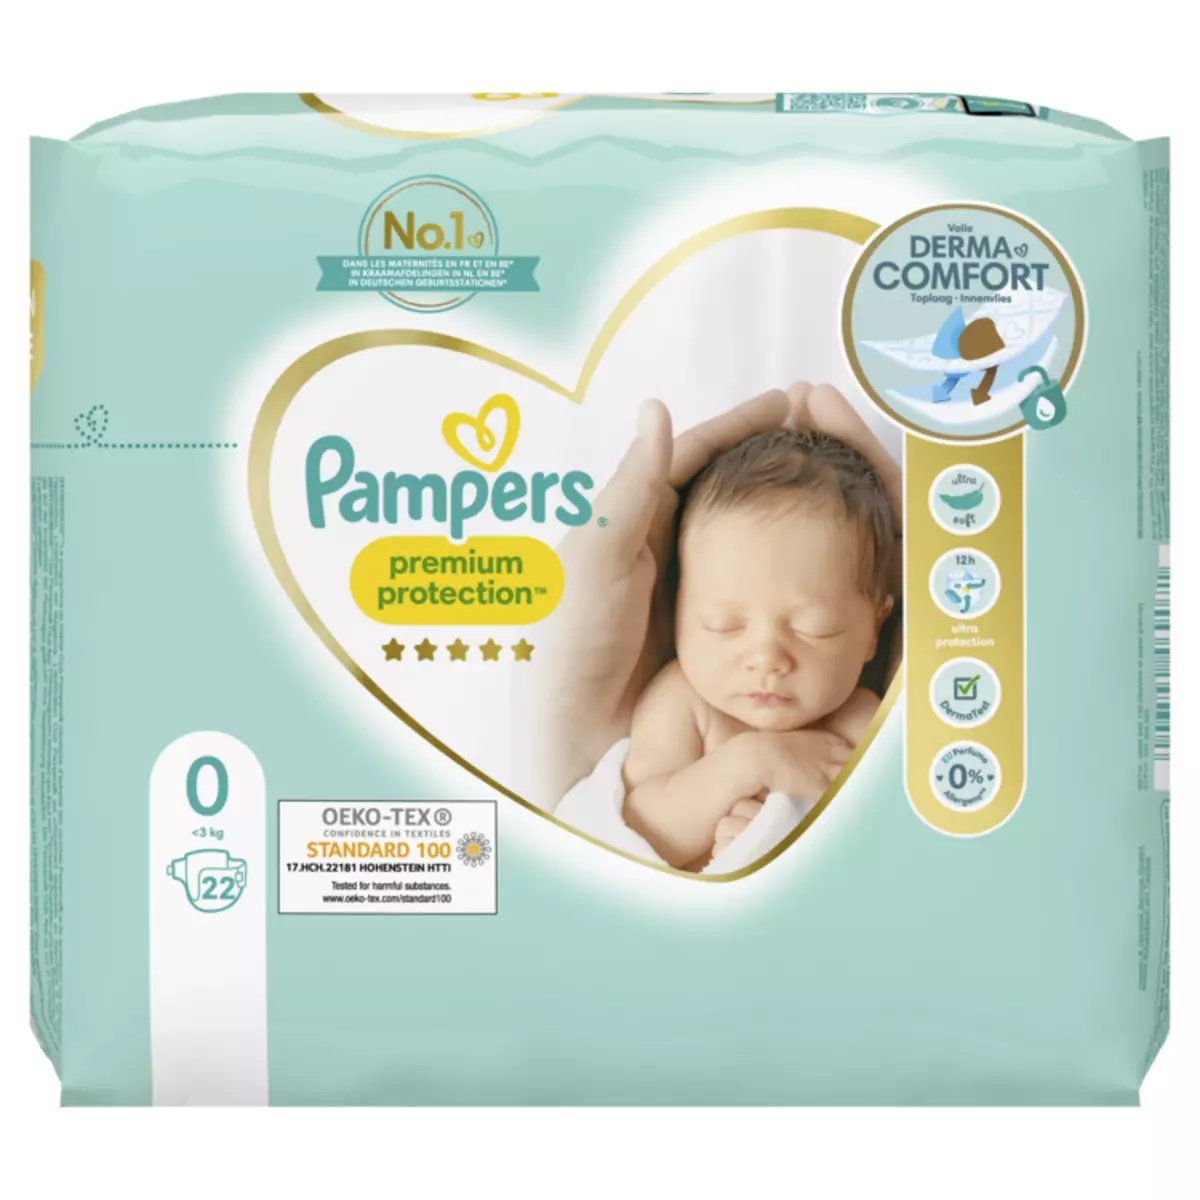 PAMPERS Premium protection couches taille 0 (-3kg) 24 couches pas